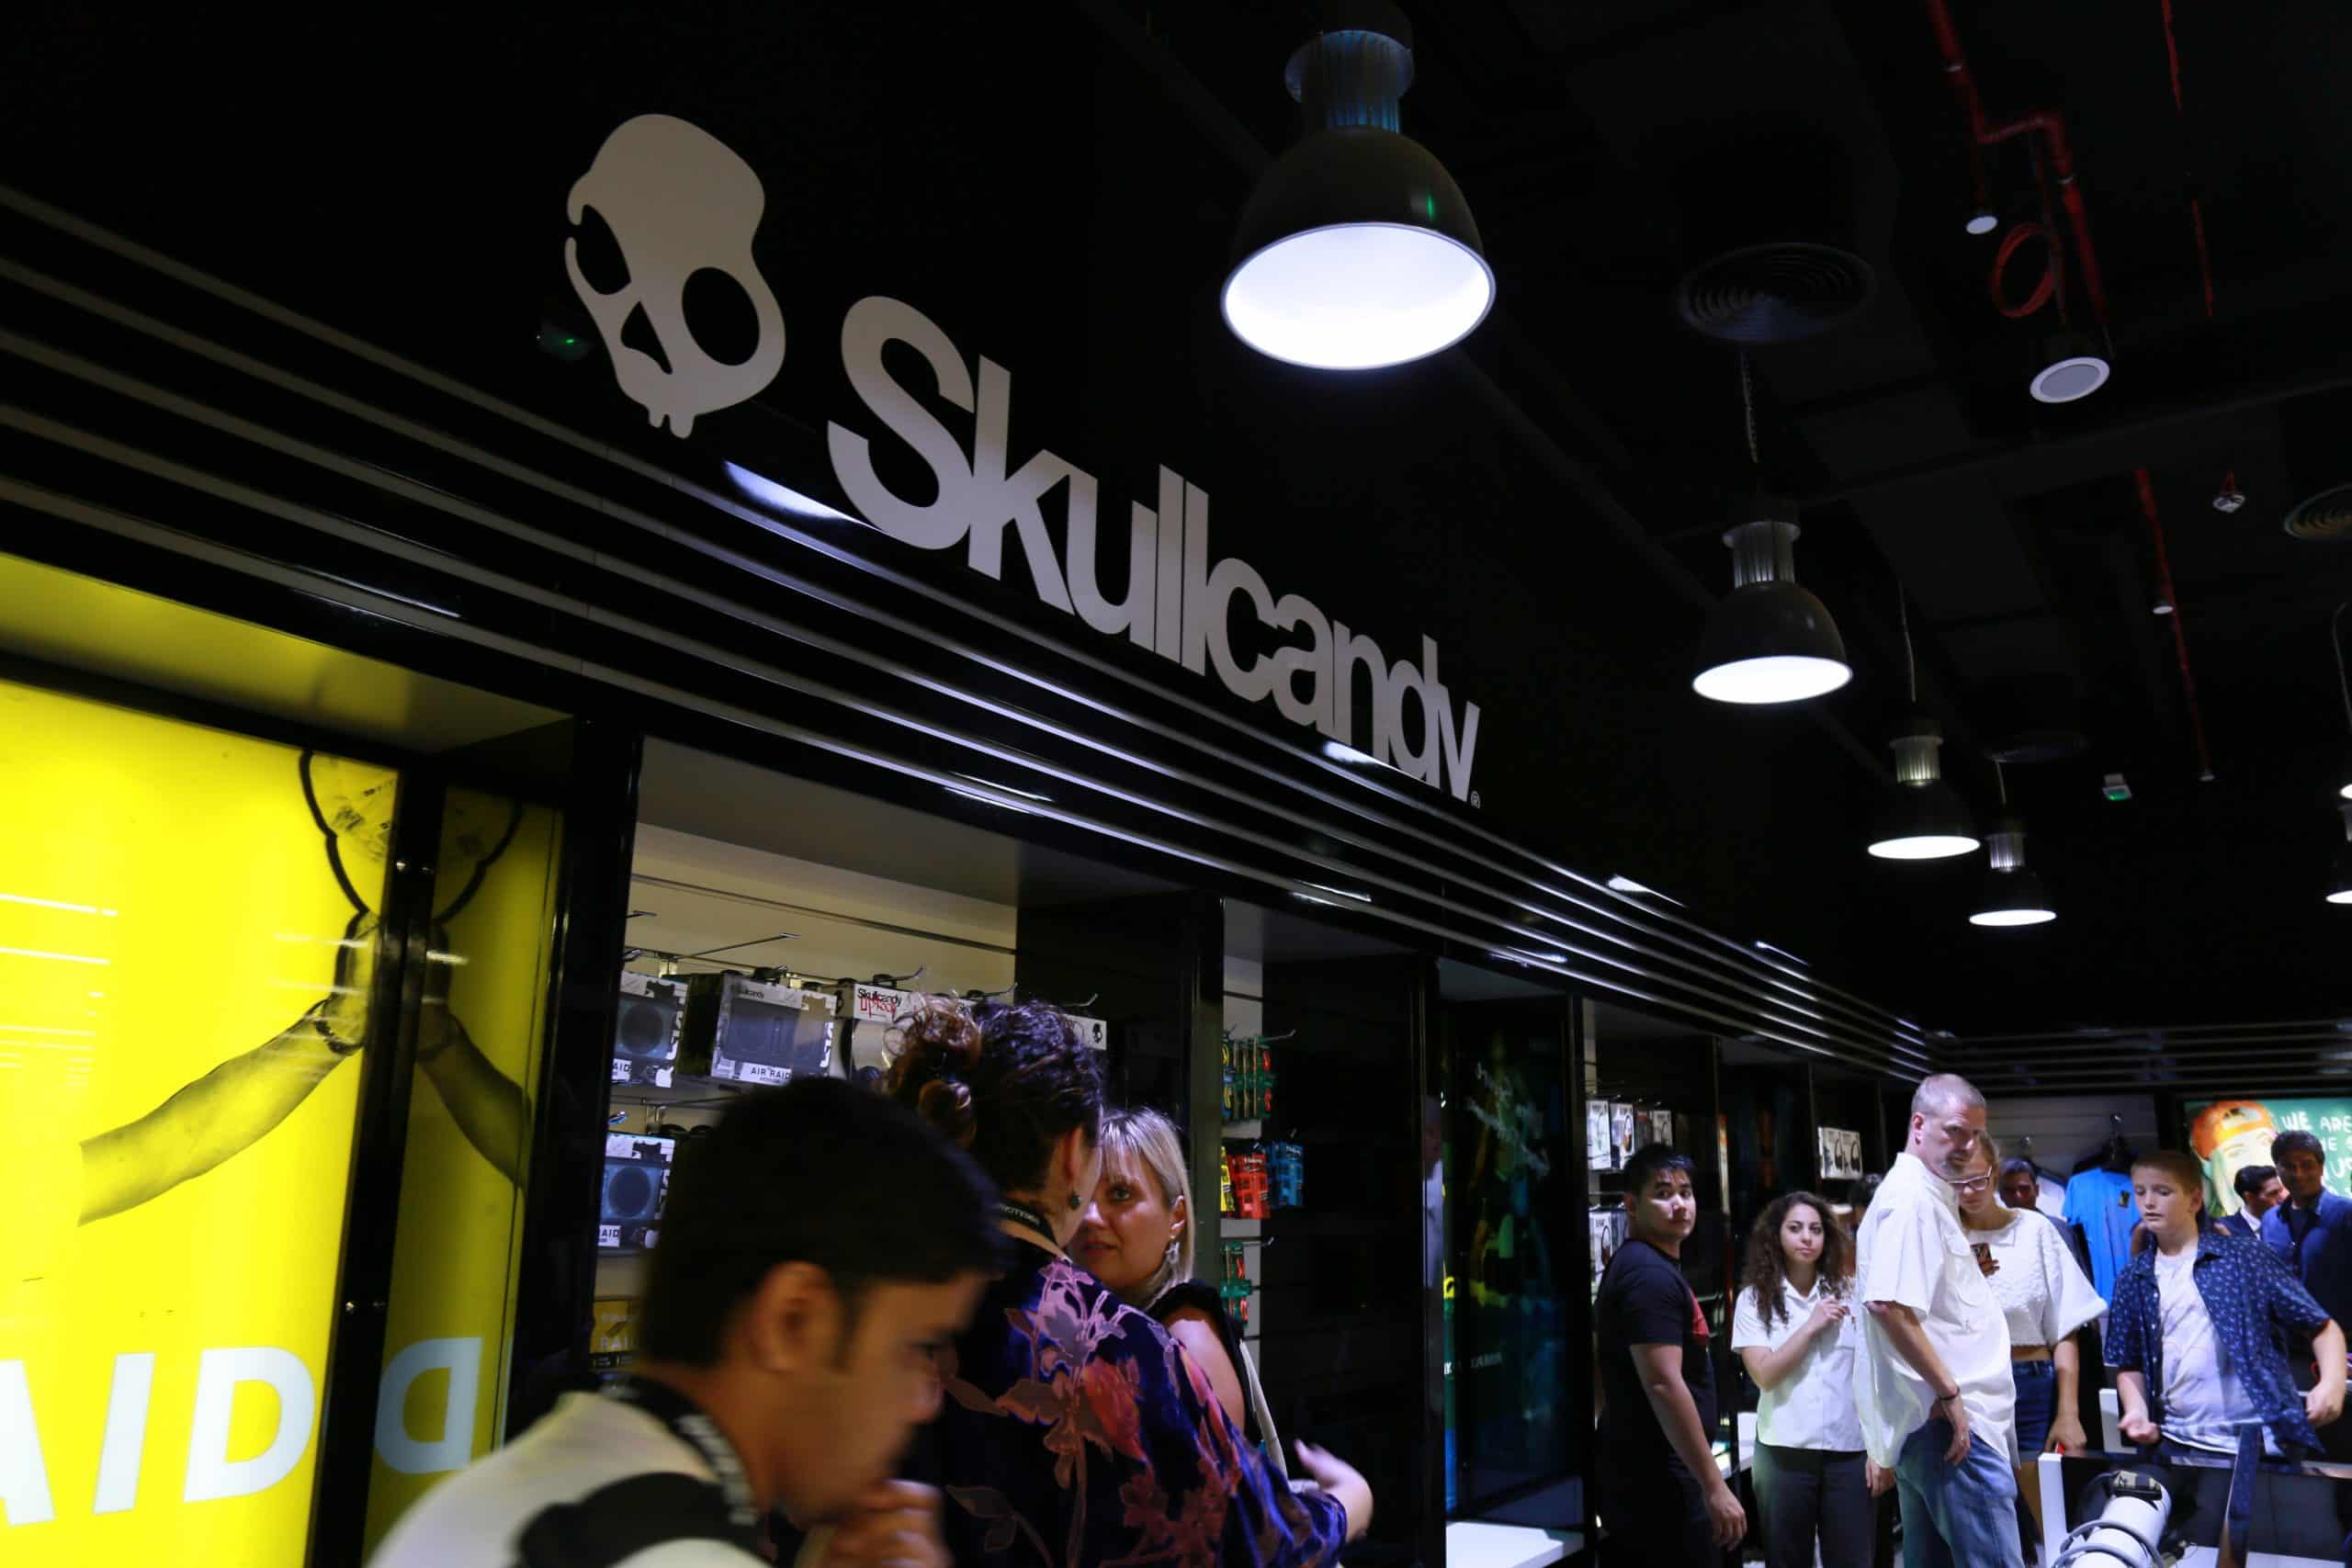 Skullcandy Launches First International Concept Store In Dubai